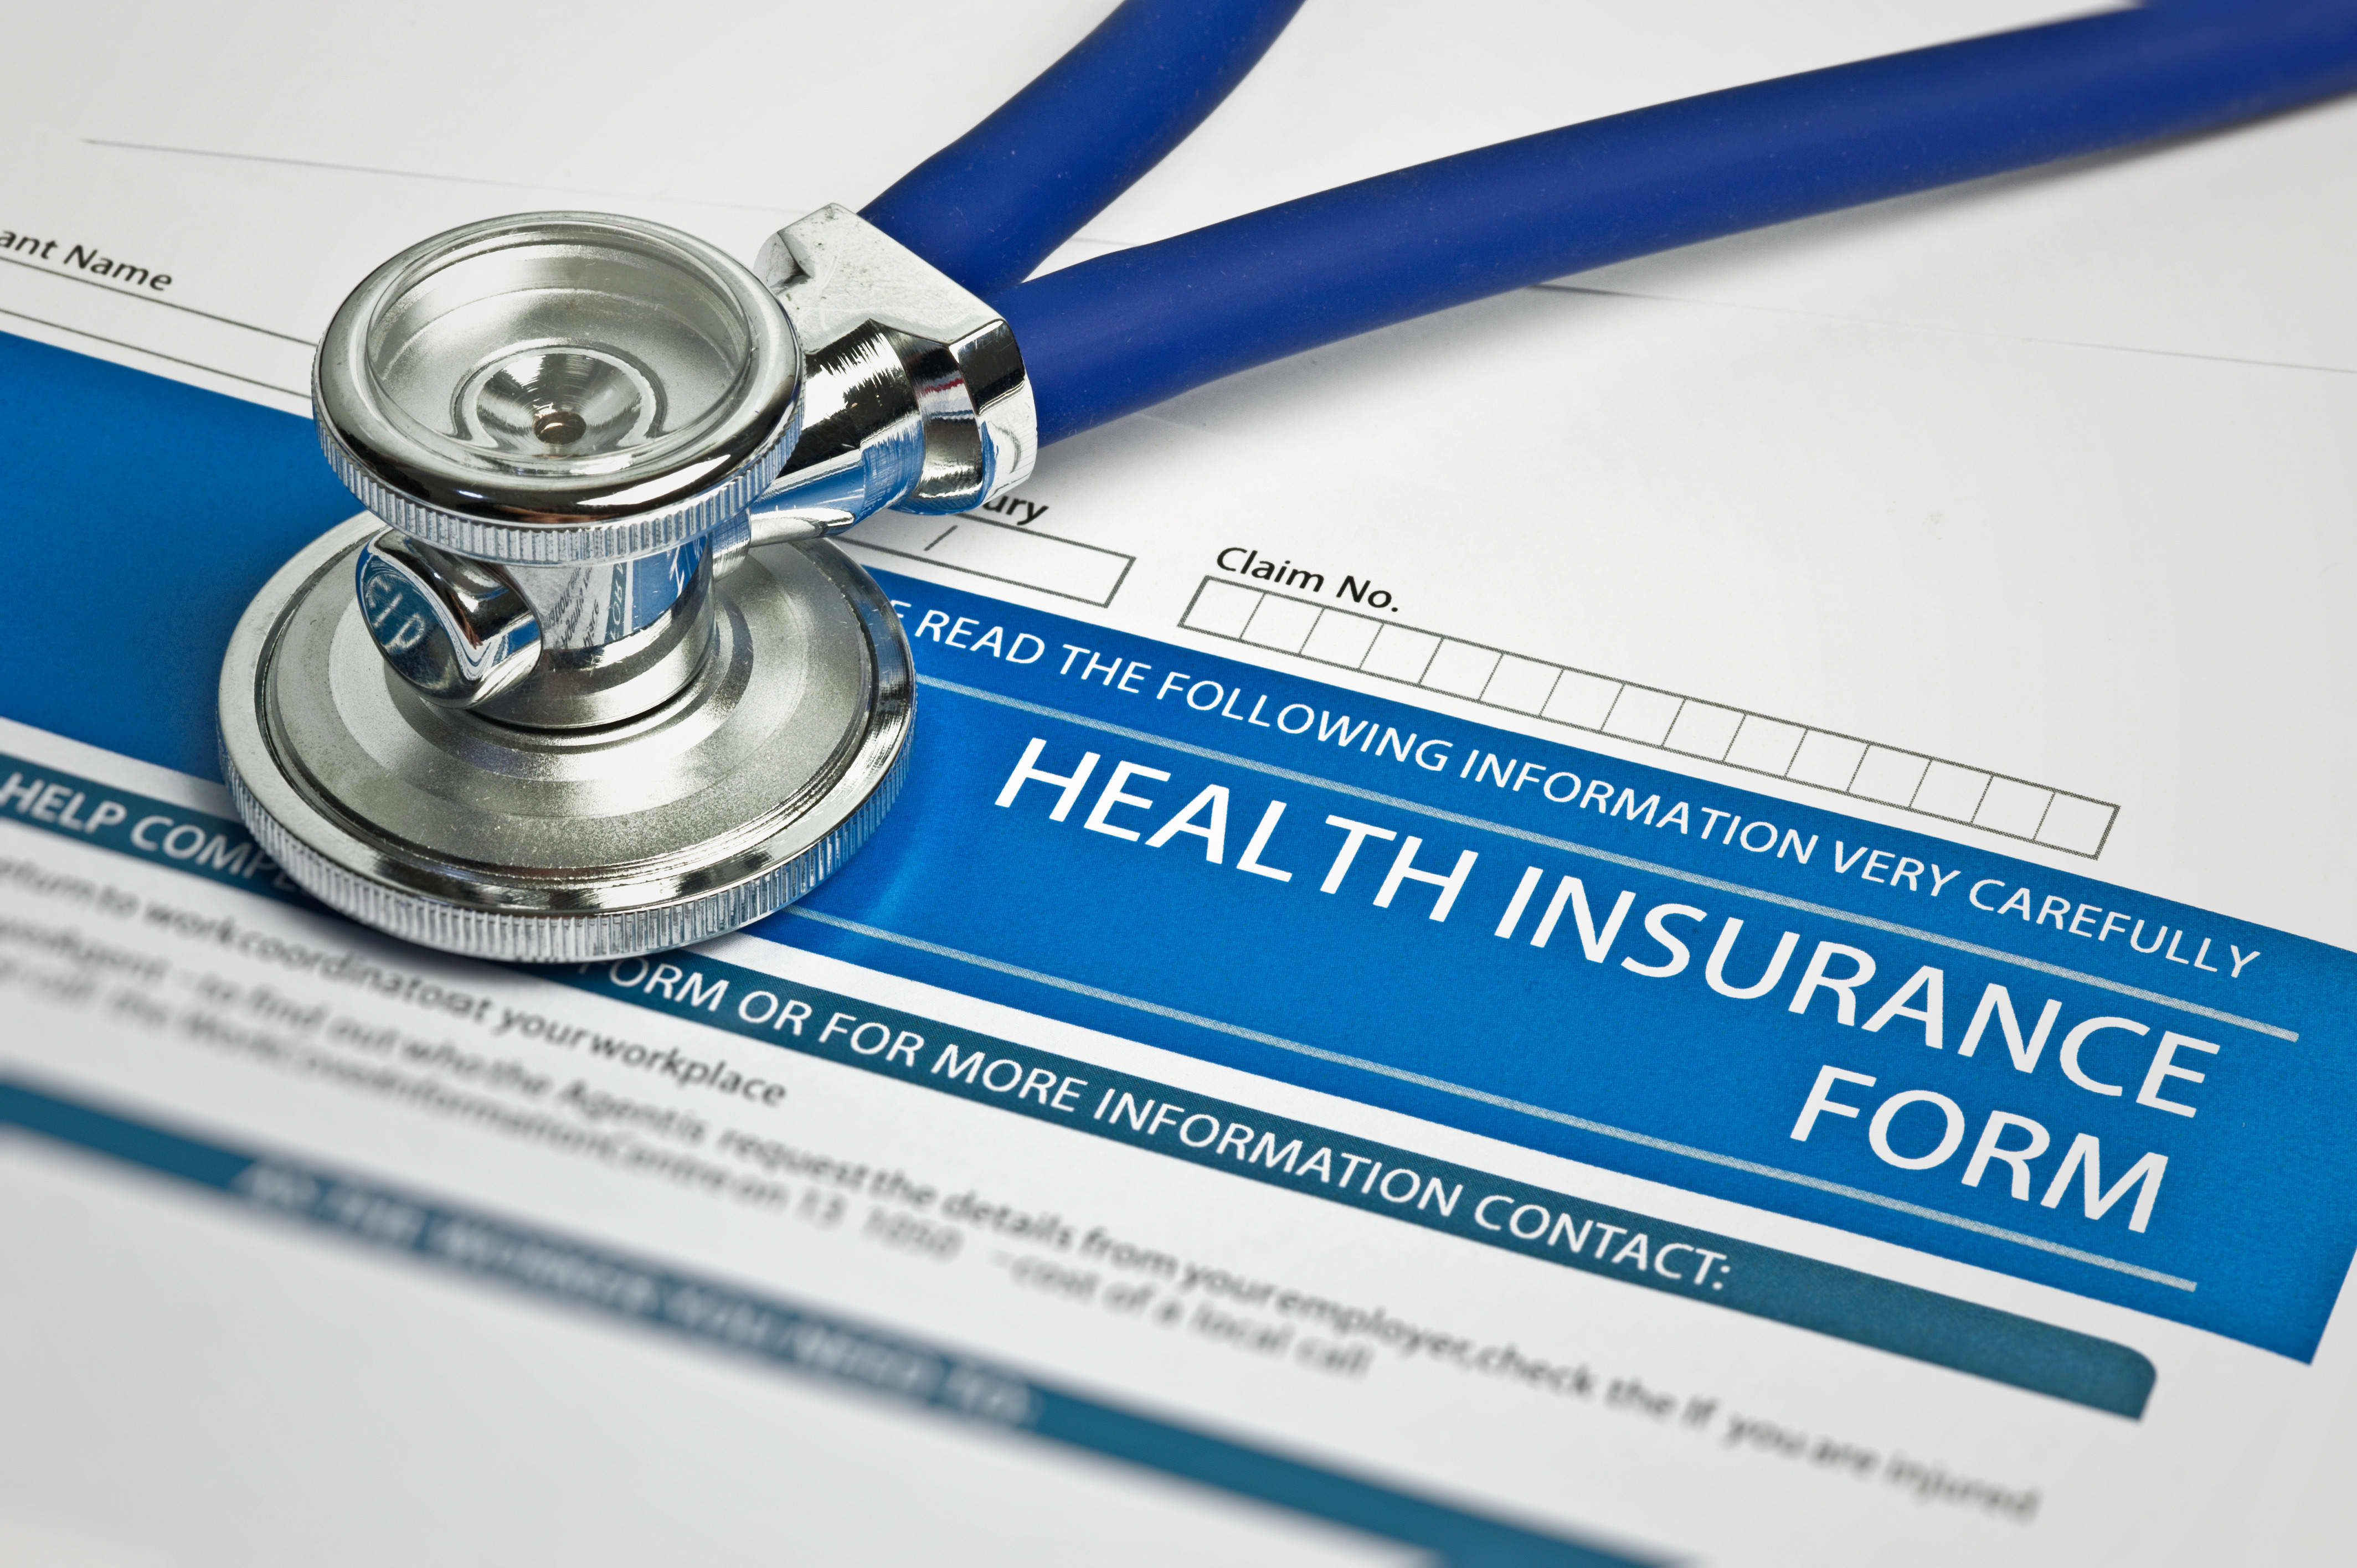 How Americans can save money when choosing a health insurance plan